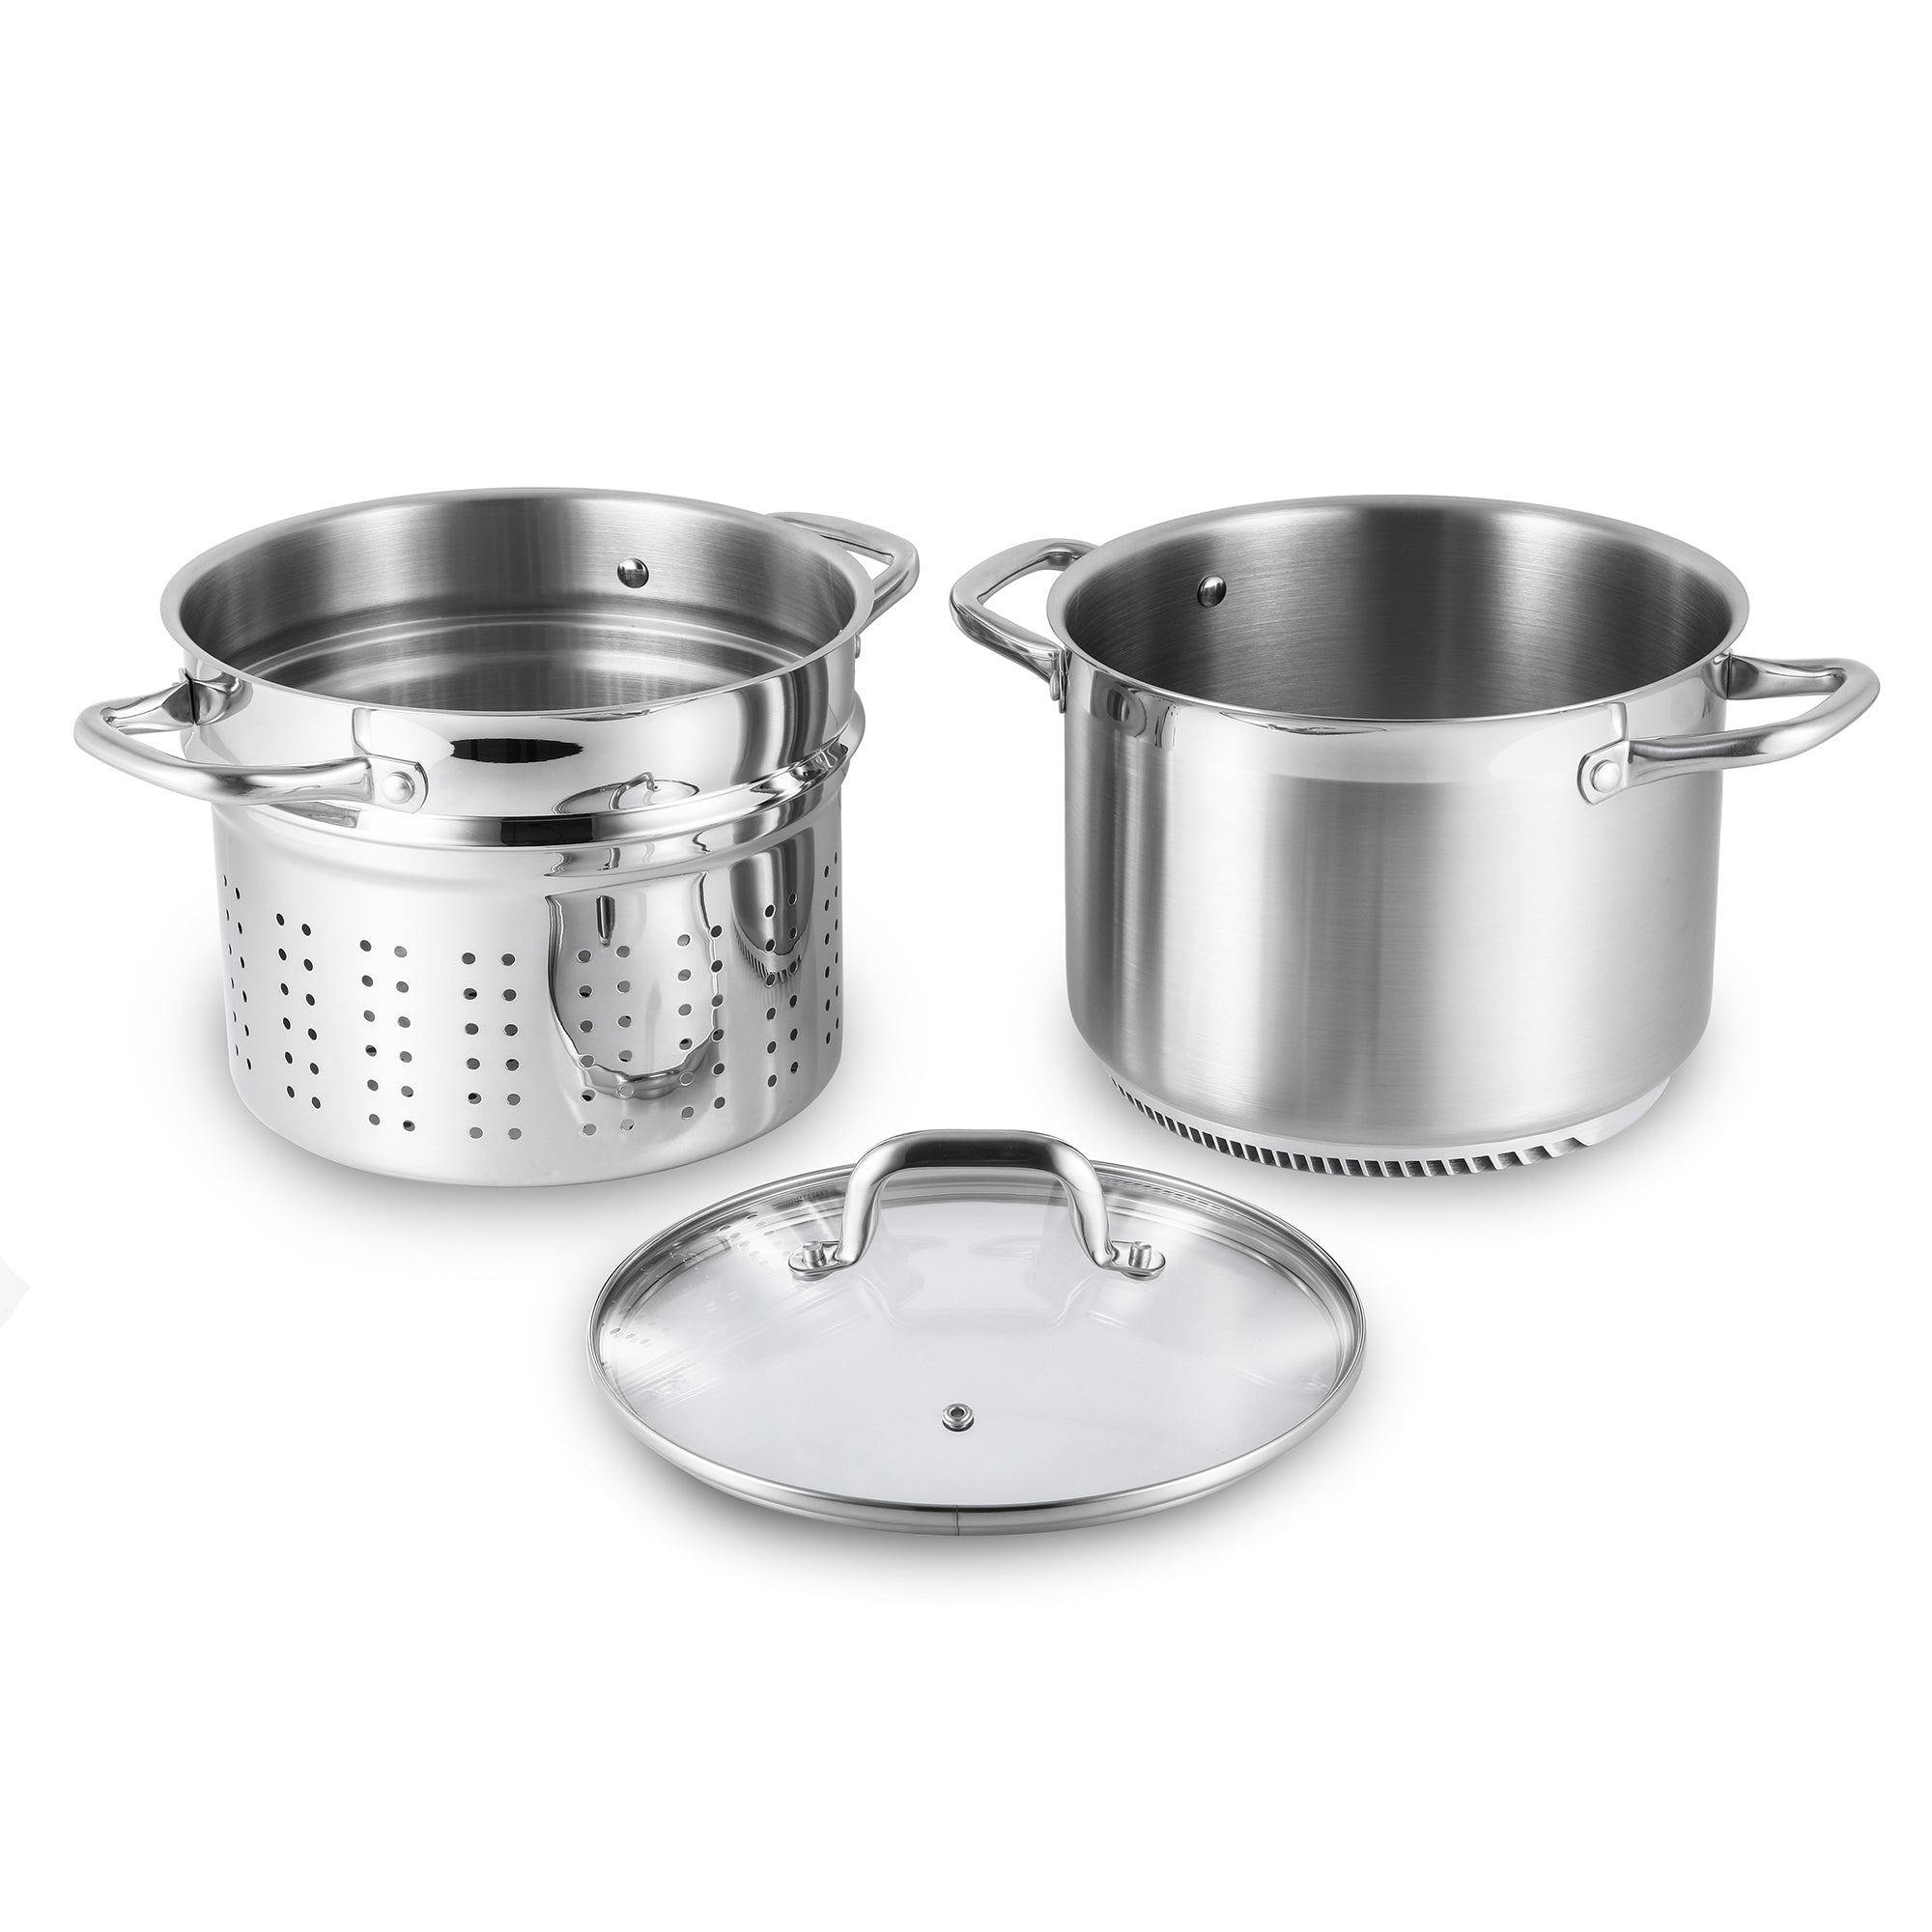 FRESHAIR™ 8 QT. STAINLESS STEEL STOCK POT, TIME-AND-ENERGY SAVING